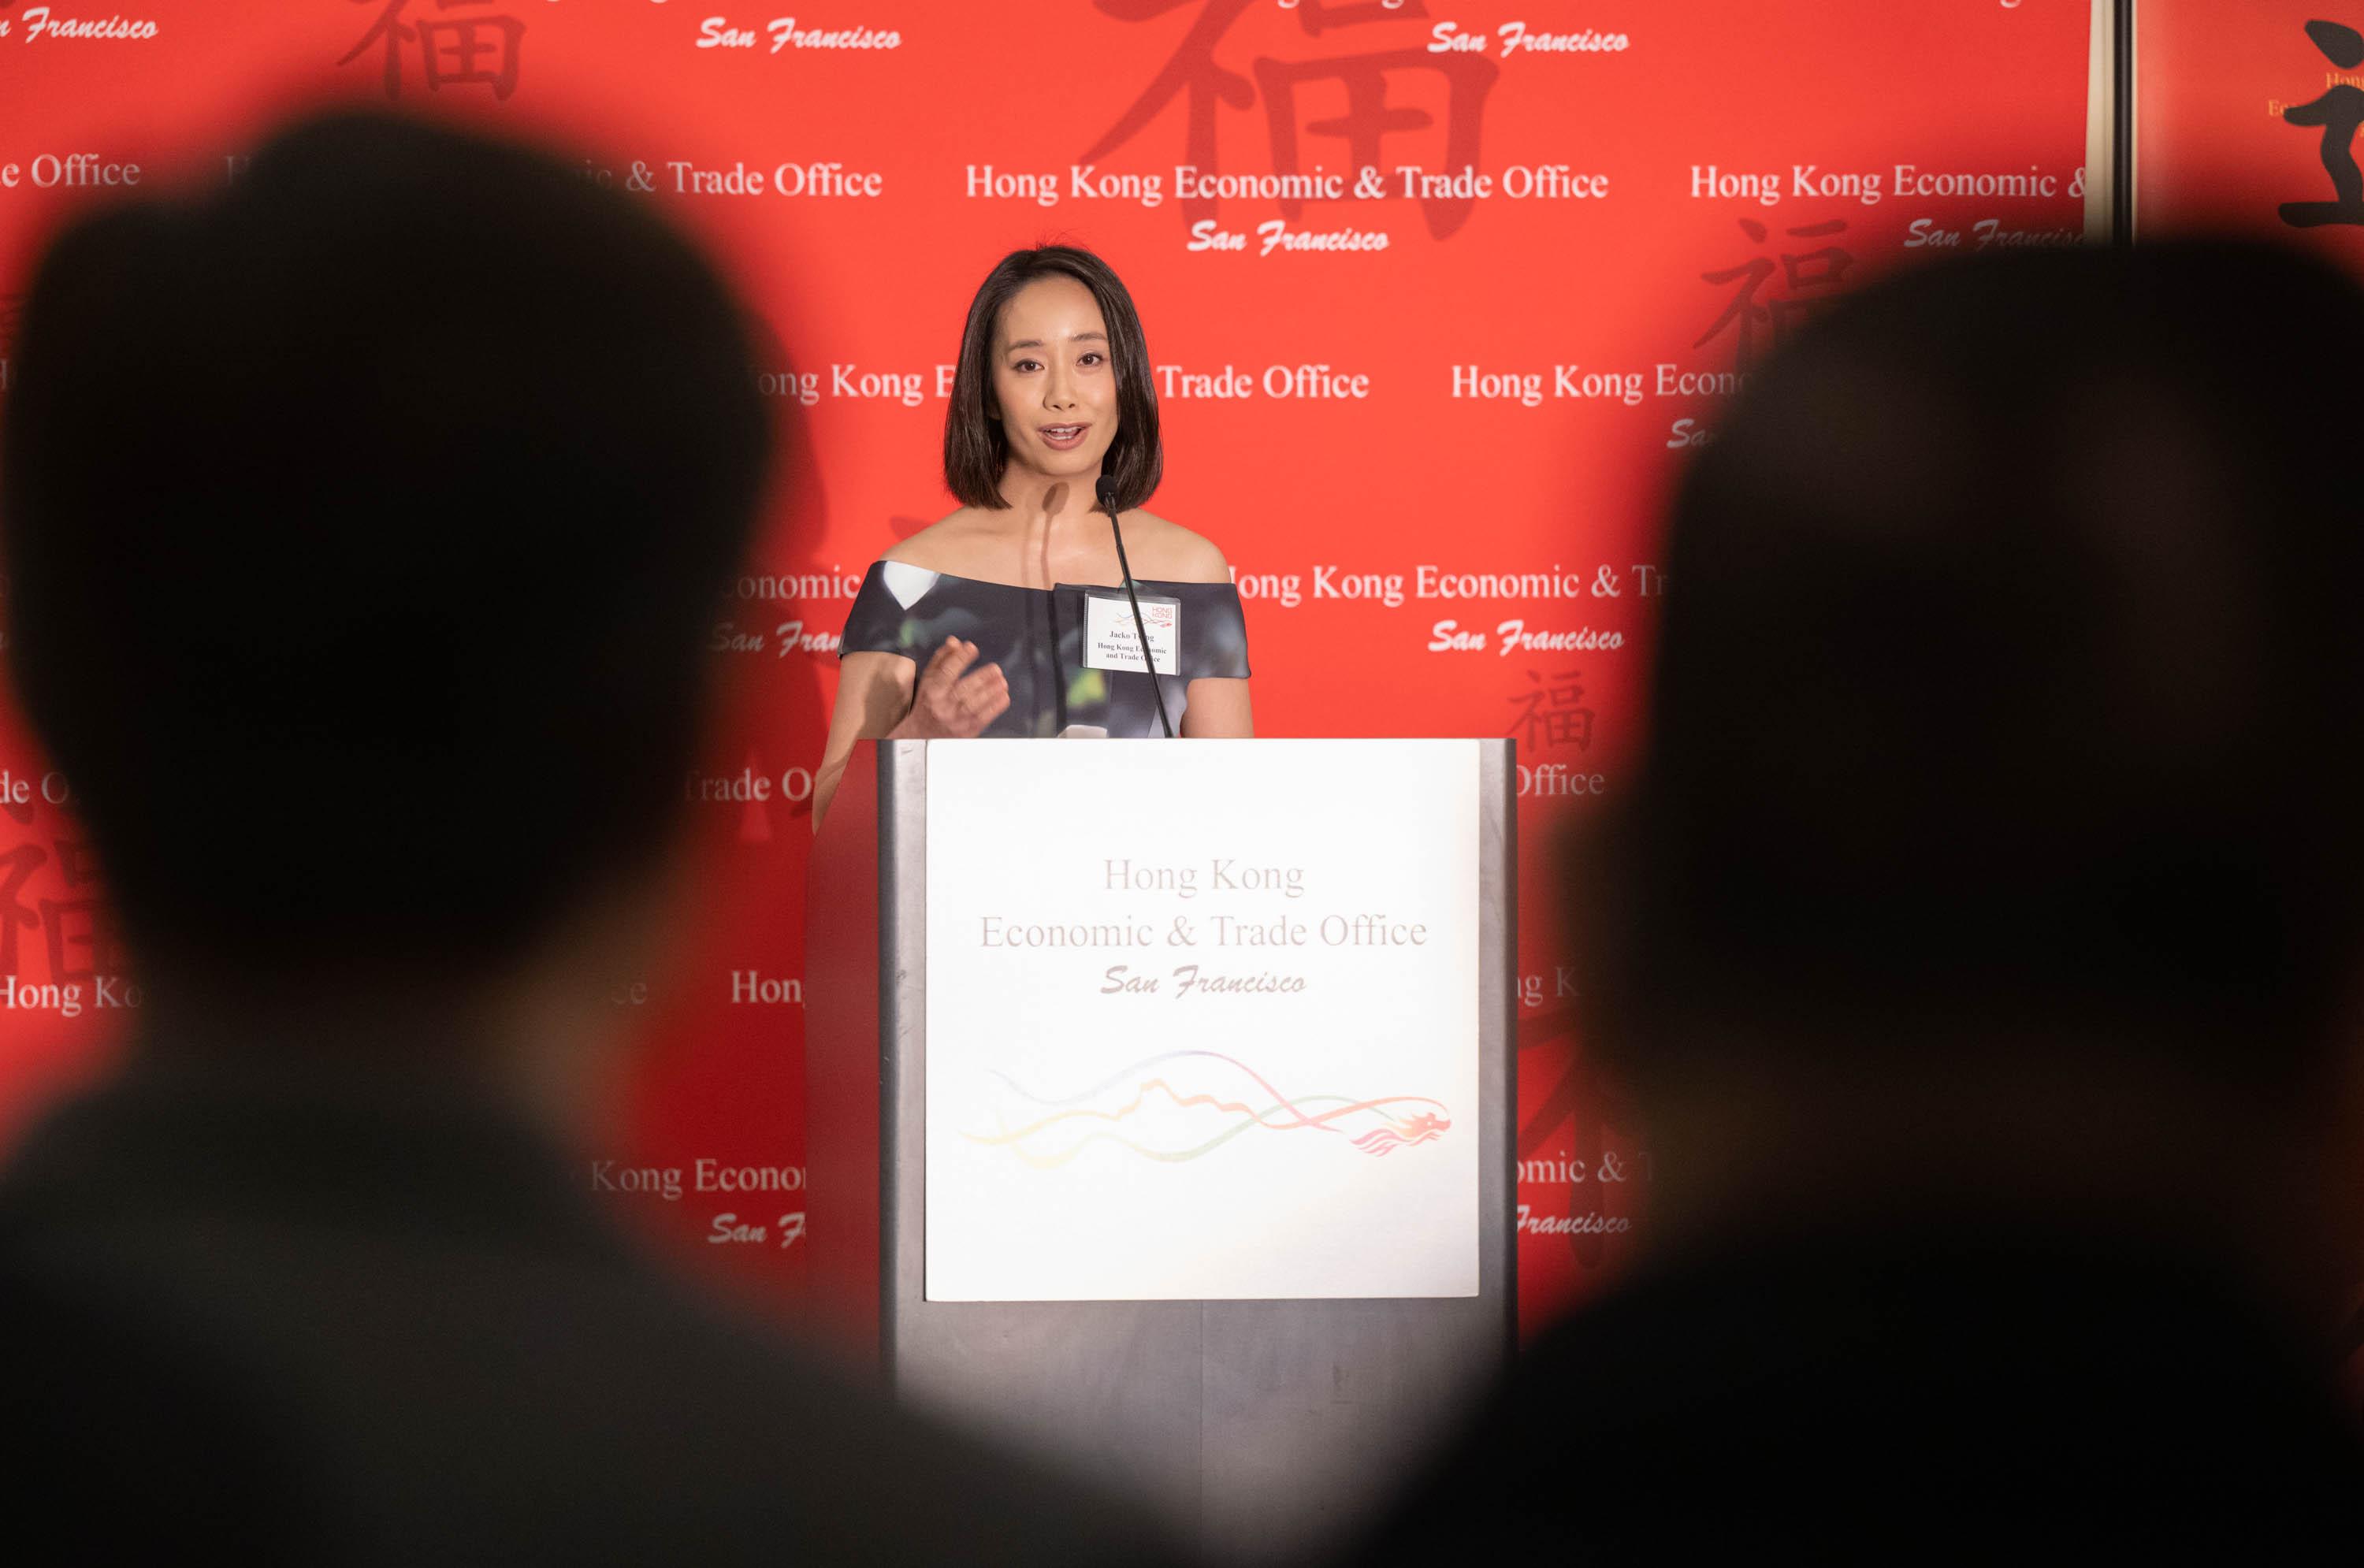 The Director of the Hong Kong Economic and Trade Office in San Francisco, Ms Jacko Tsang, speaks at the spring reception in Dallas on February 3 (Dallas time).